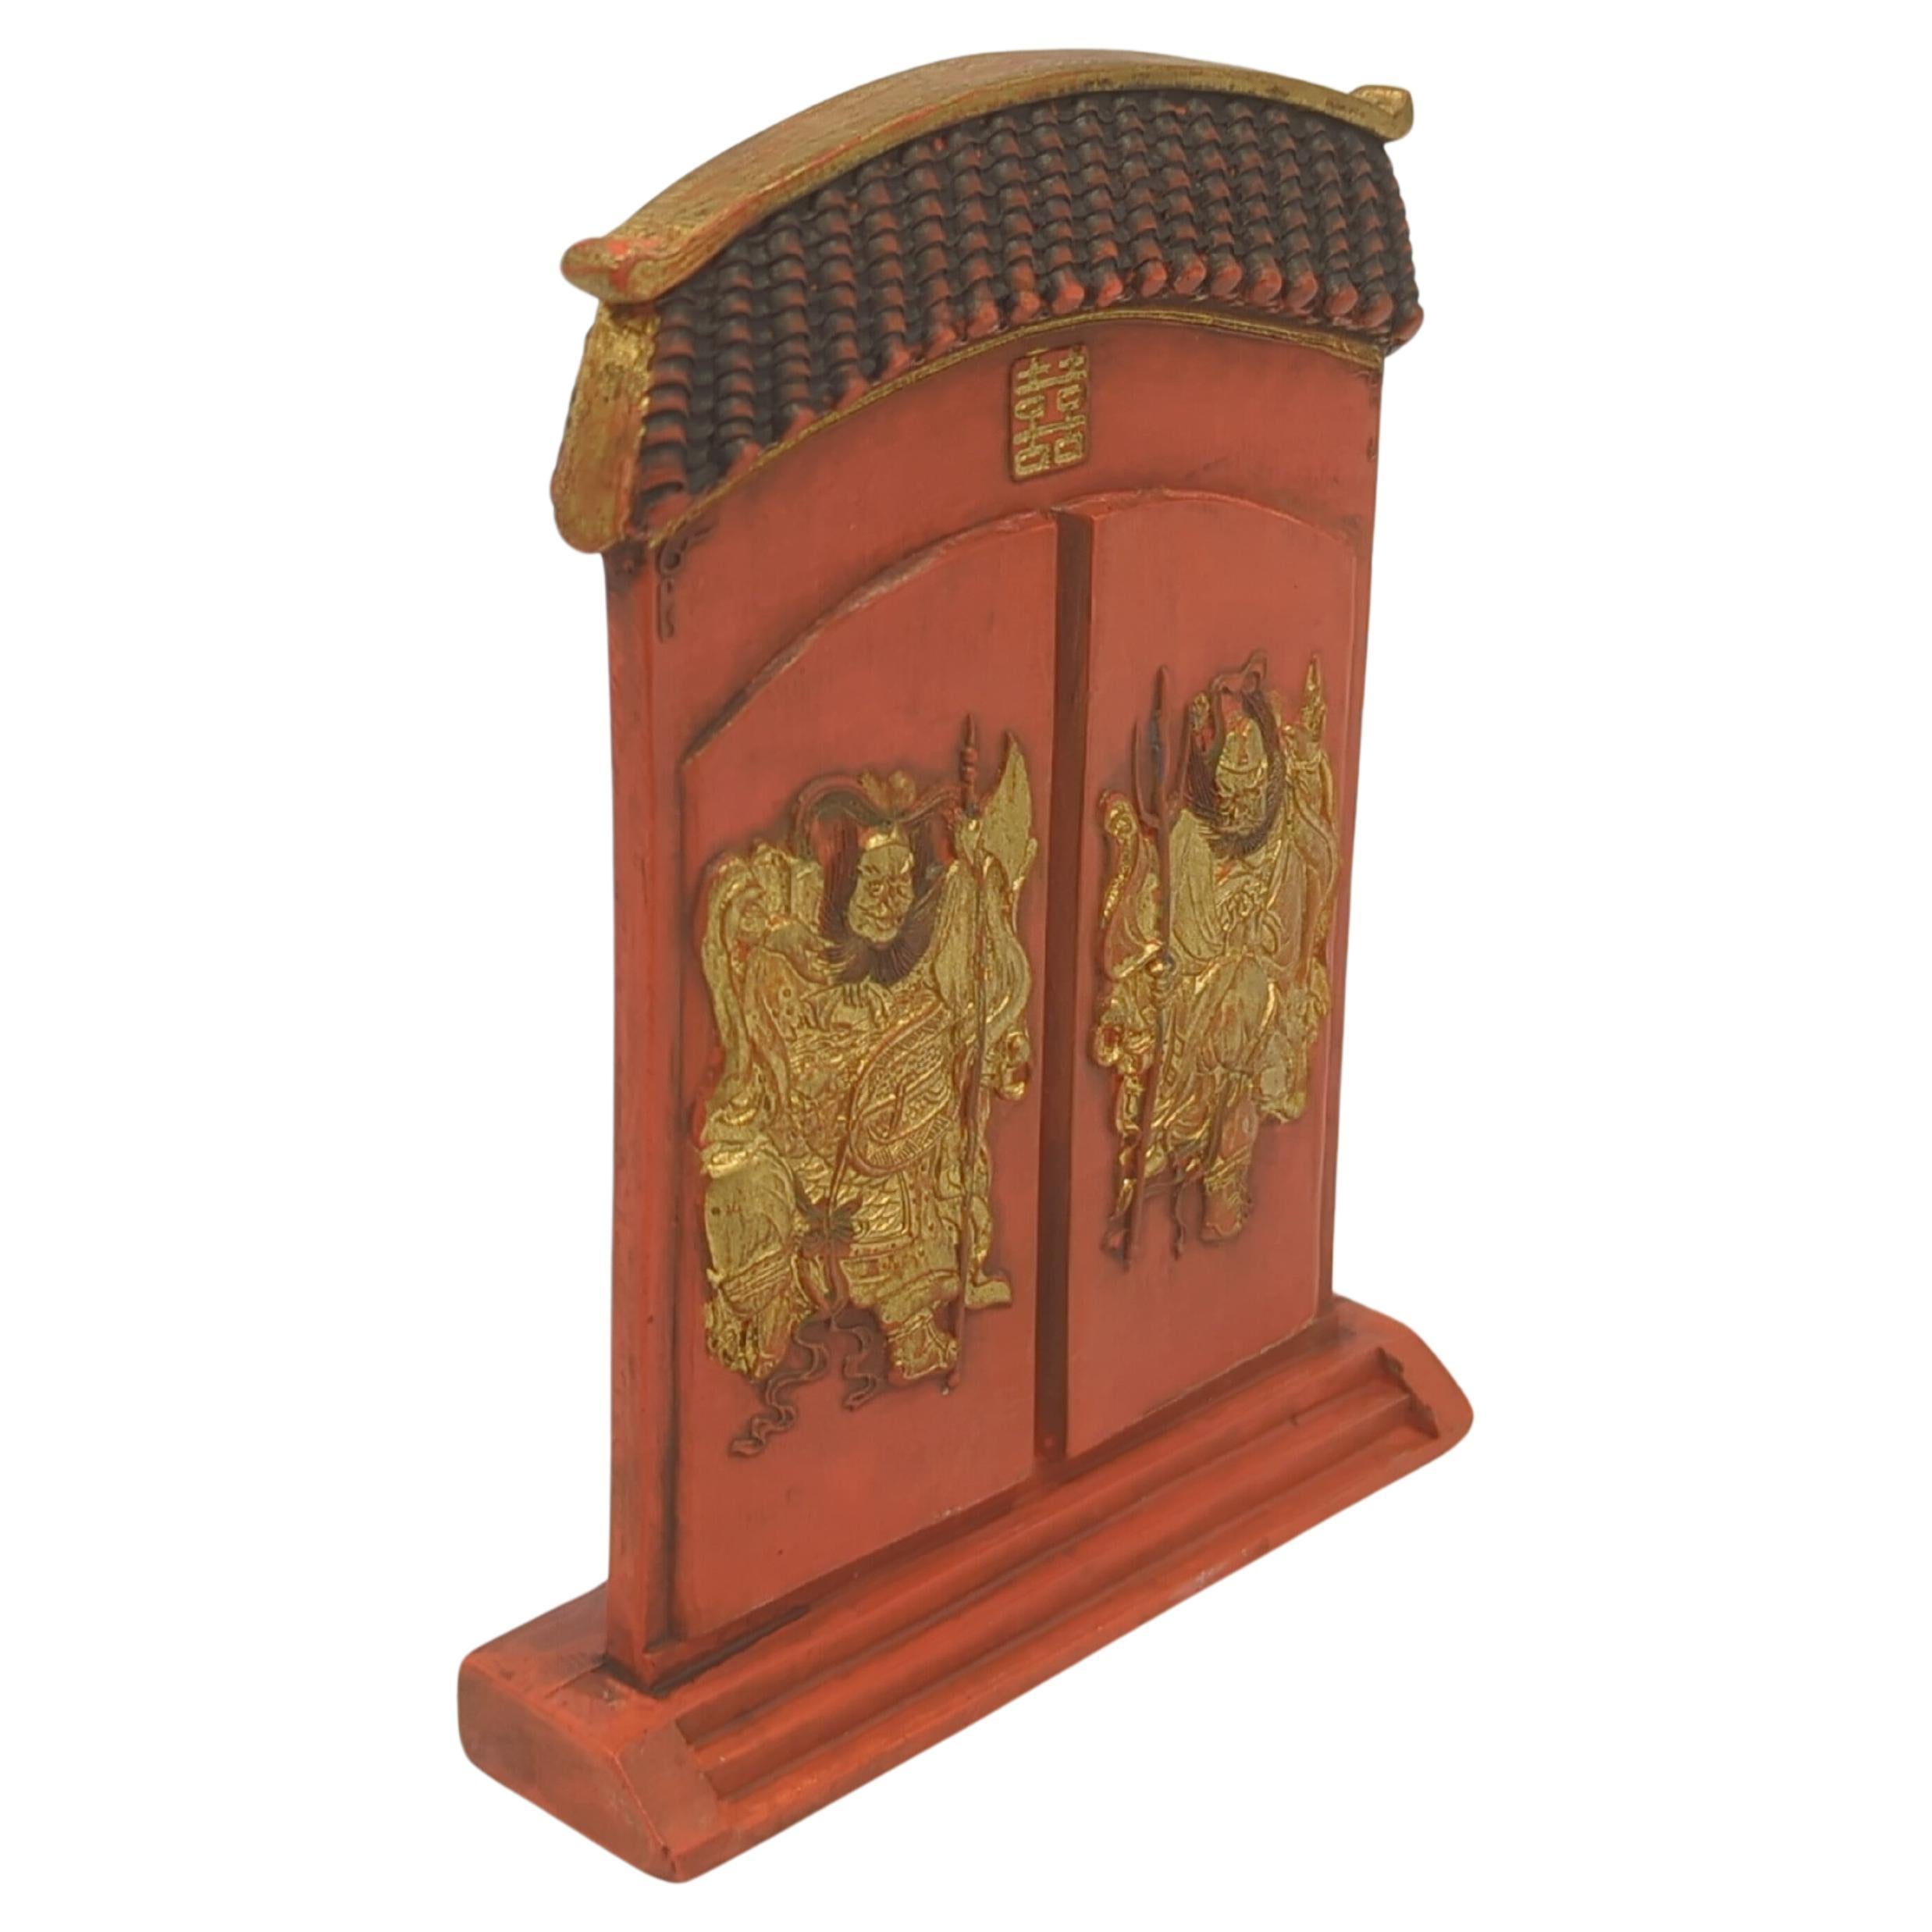 Seltene antike chinesische Qing Guangxu Imperial Style Red Ink Stick mit Box 19c (Qing-Dynastie) im Angebot